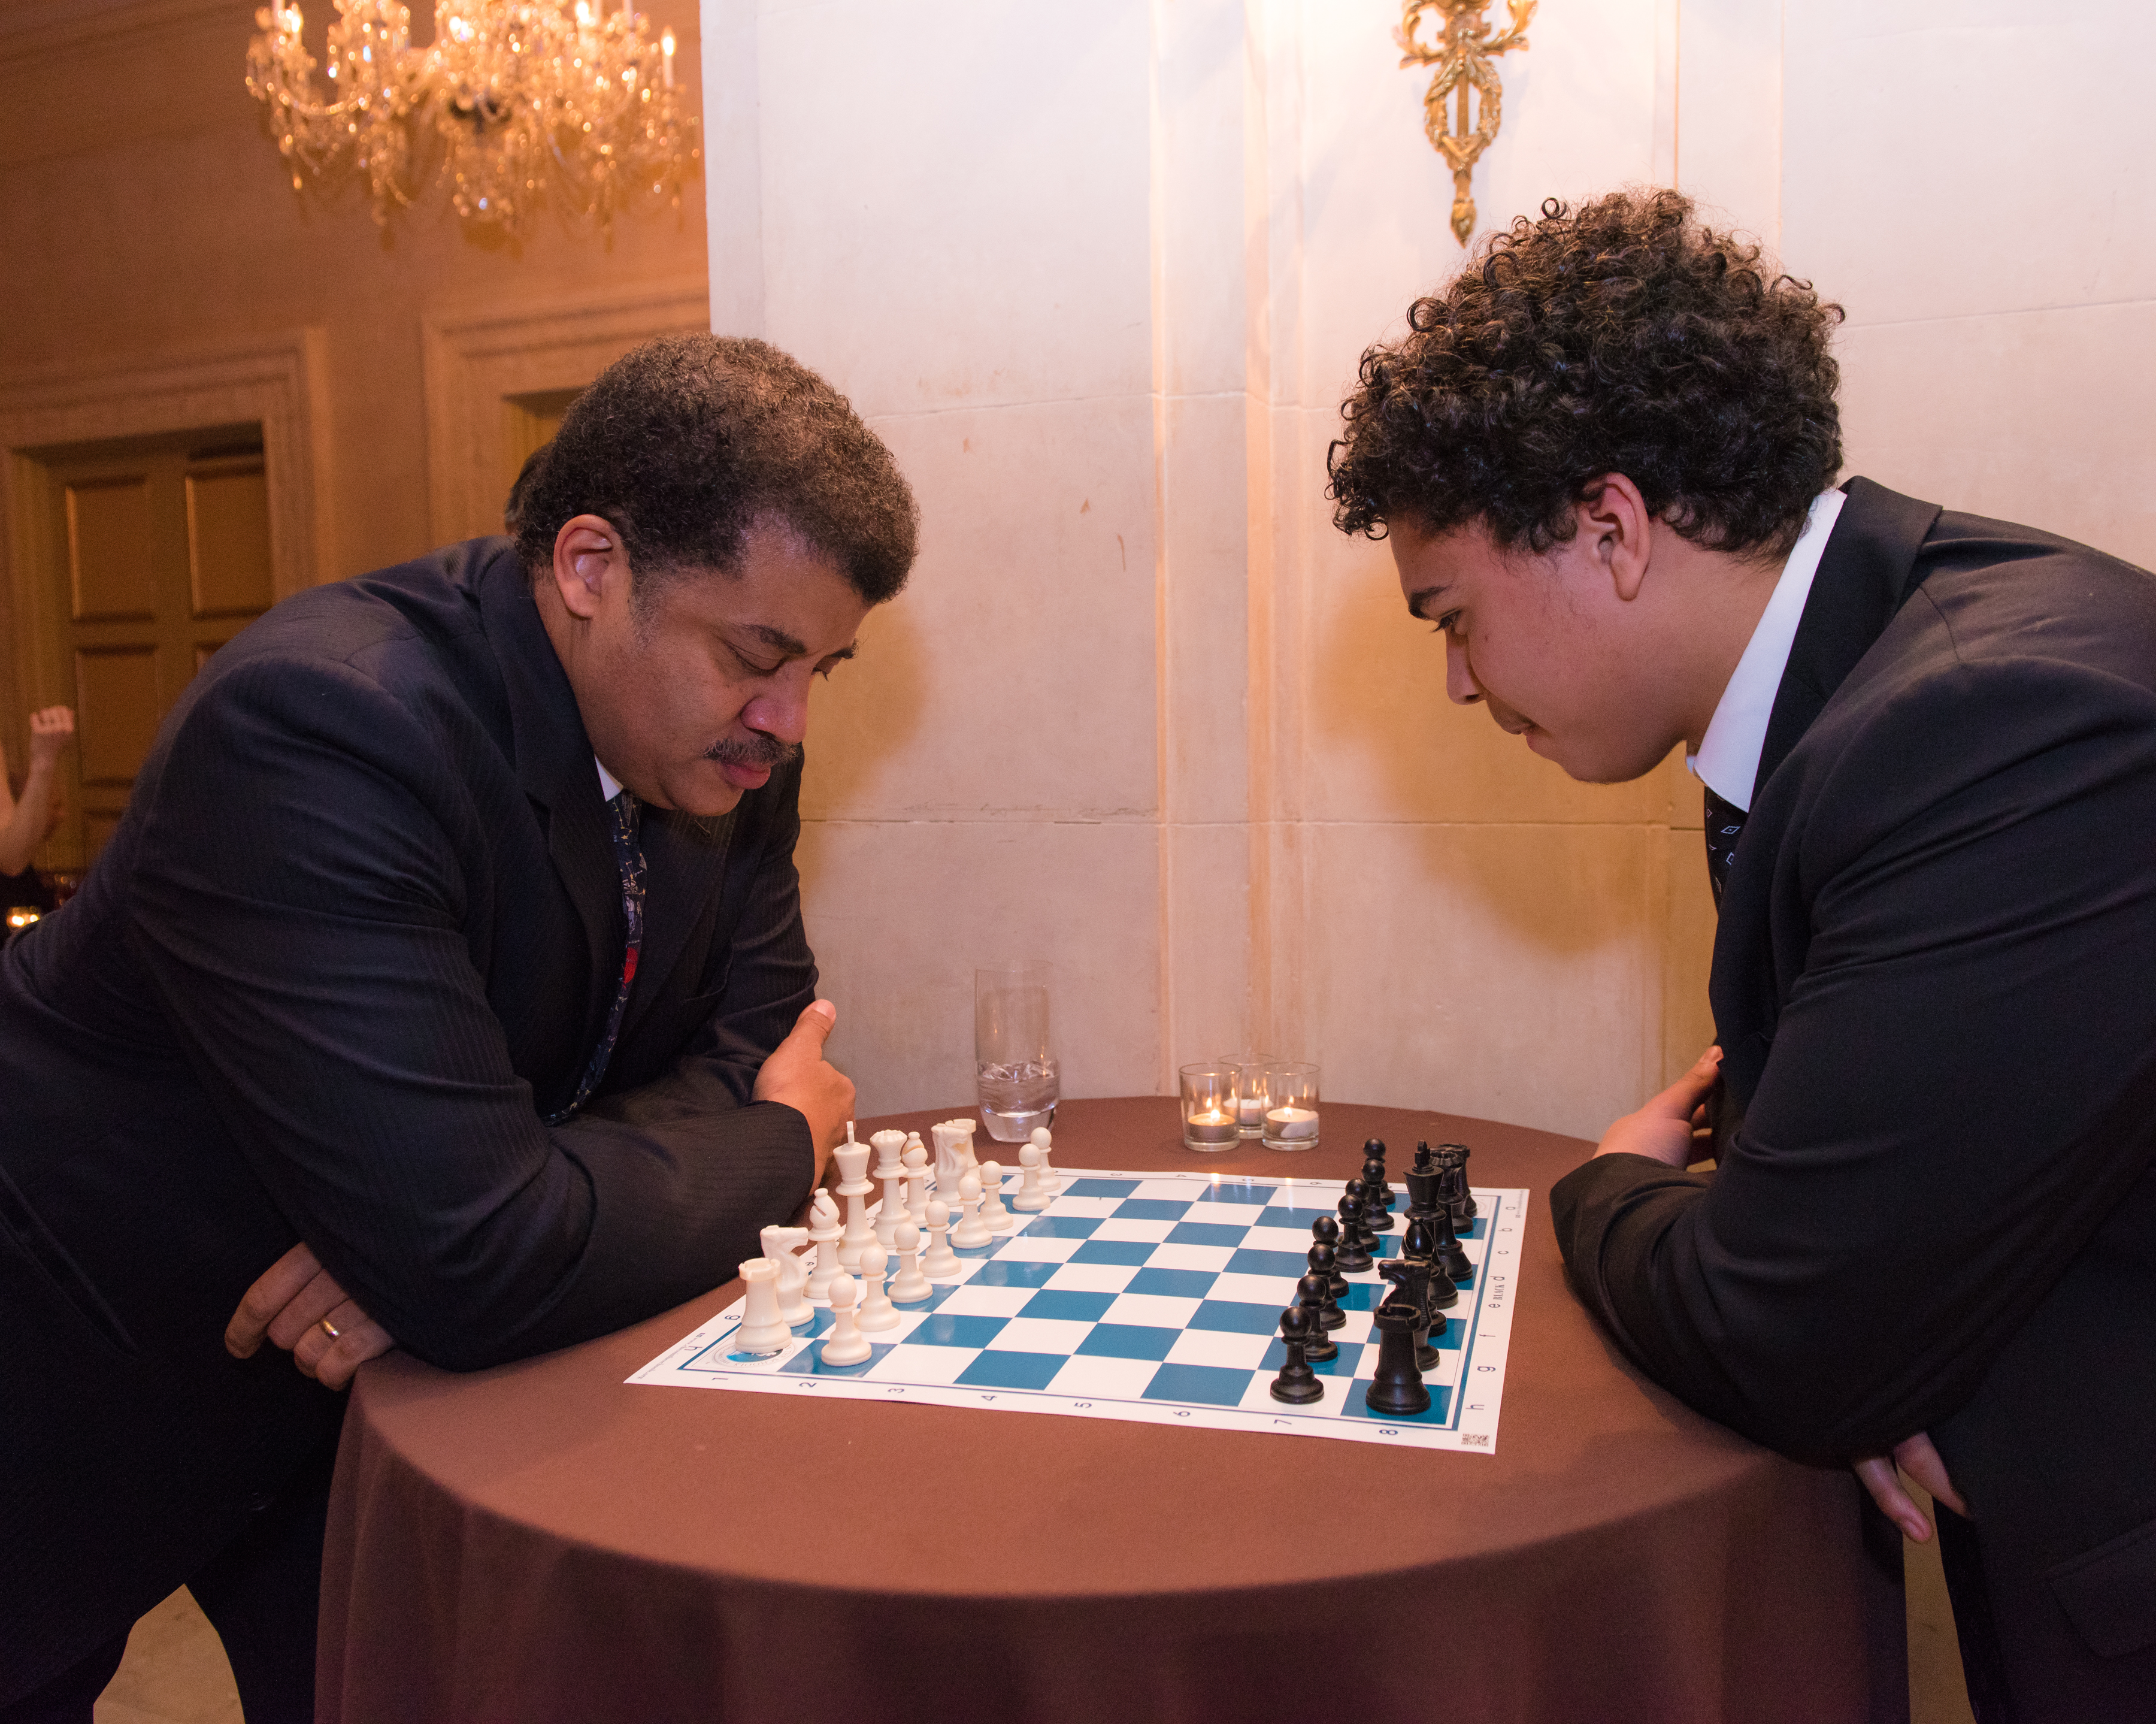 Dr. Neil deGrasse Tyson challenges College Bound student, John Paul Garcia, to a chess game during cocktails.